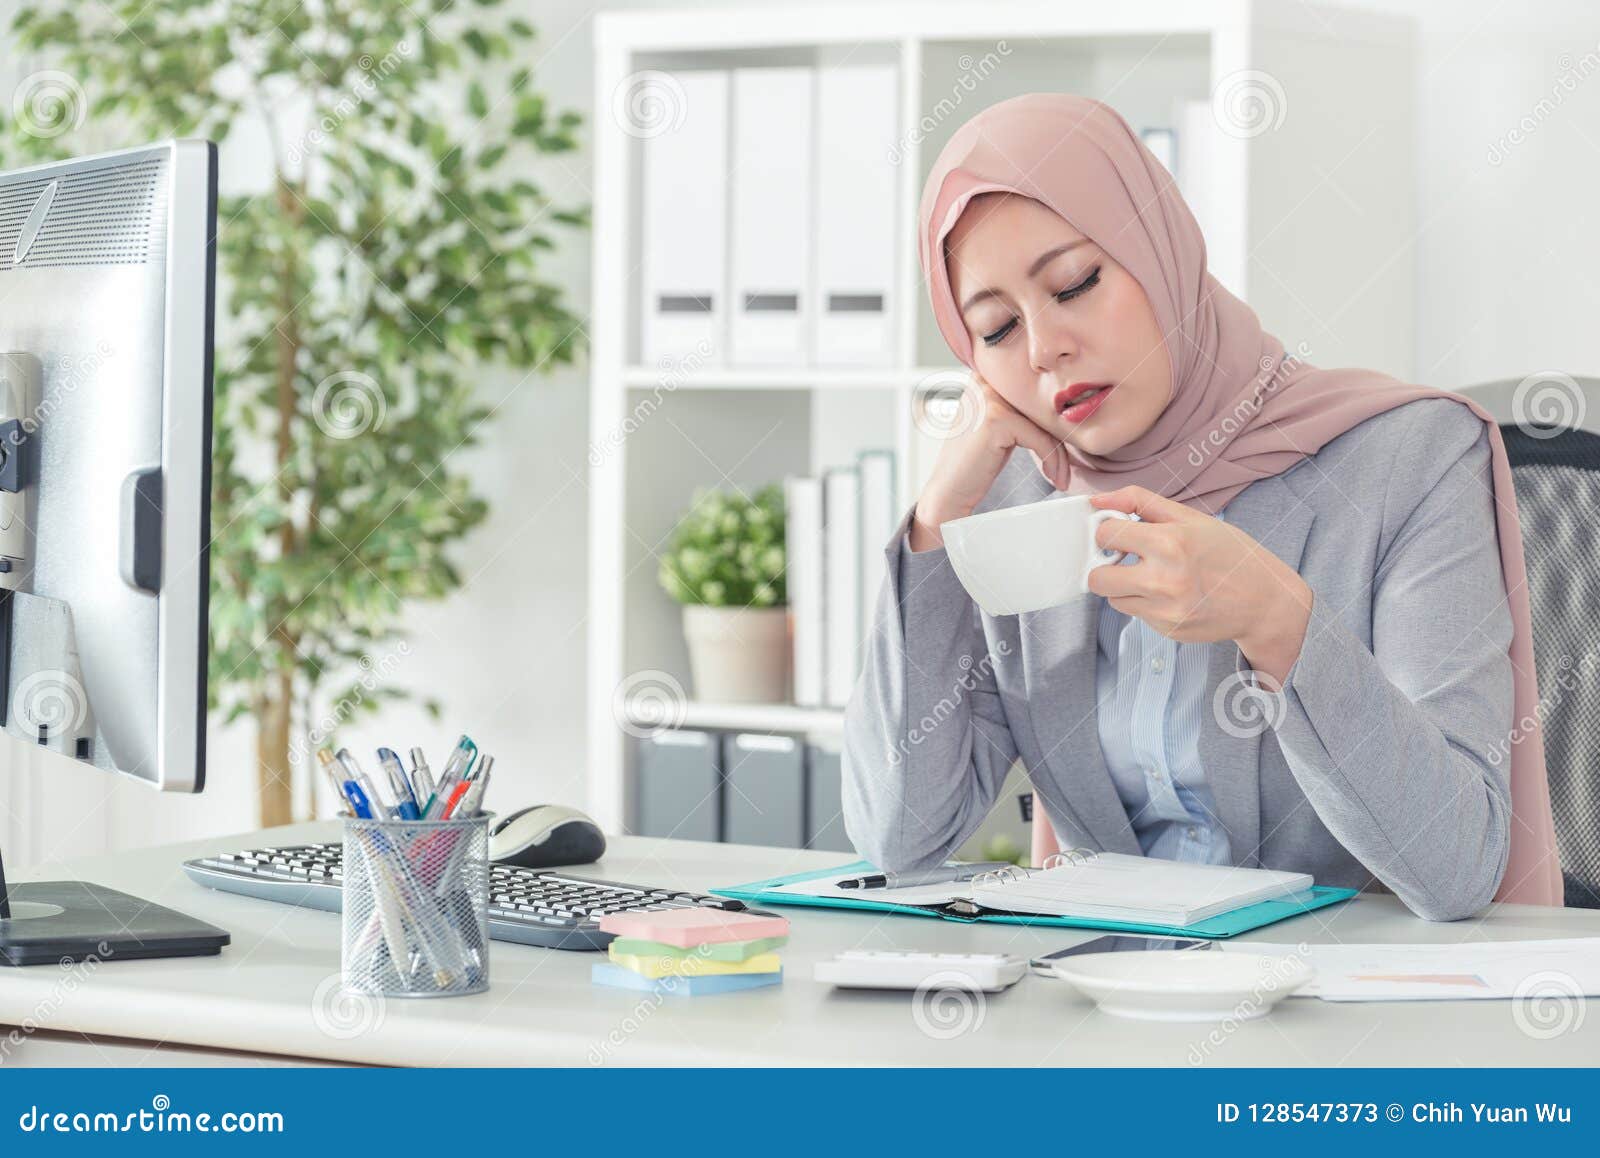 Muslim Office Lady Falling Asleep At Office Desk Stock Image